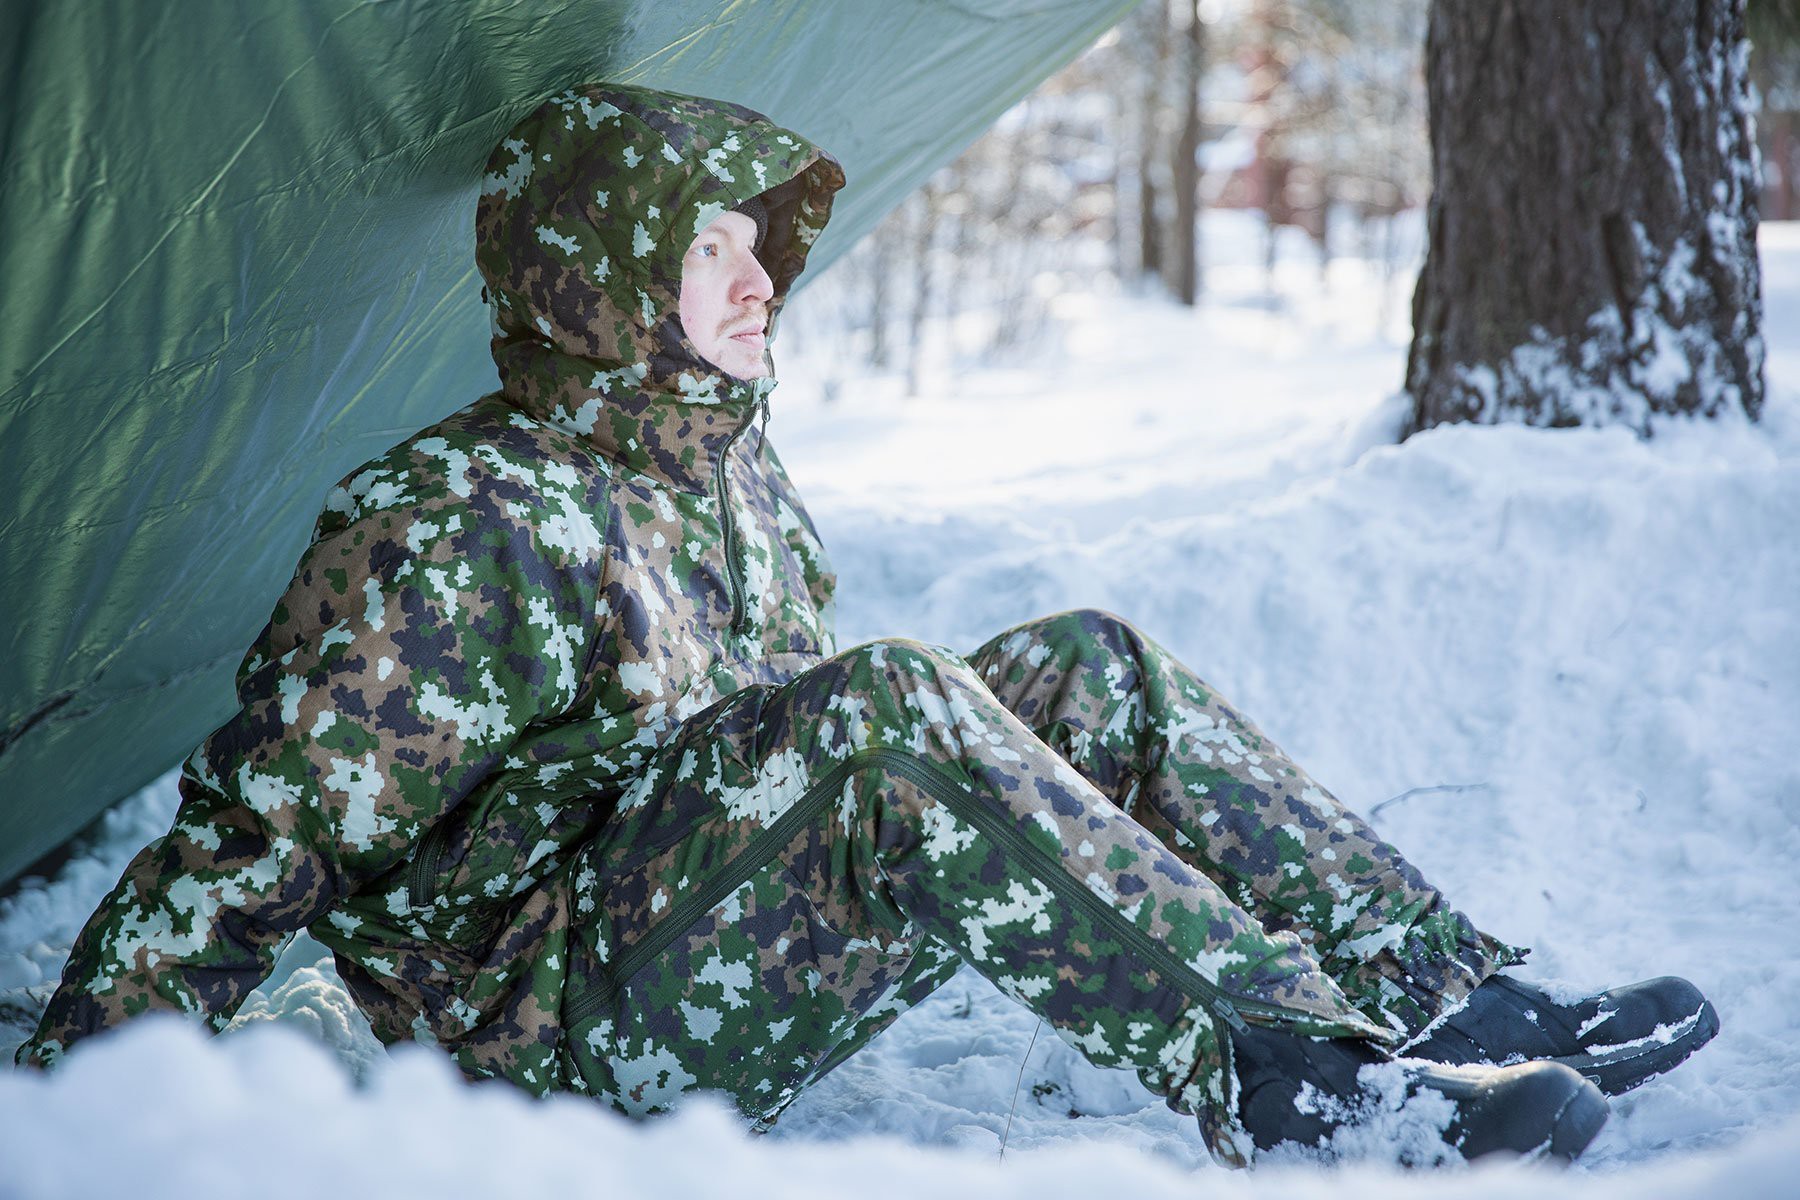 A person sitting under a tarp in snow, wearing a thermal suit in M05 camo.